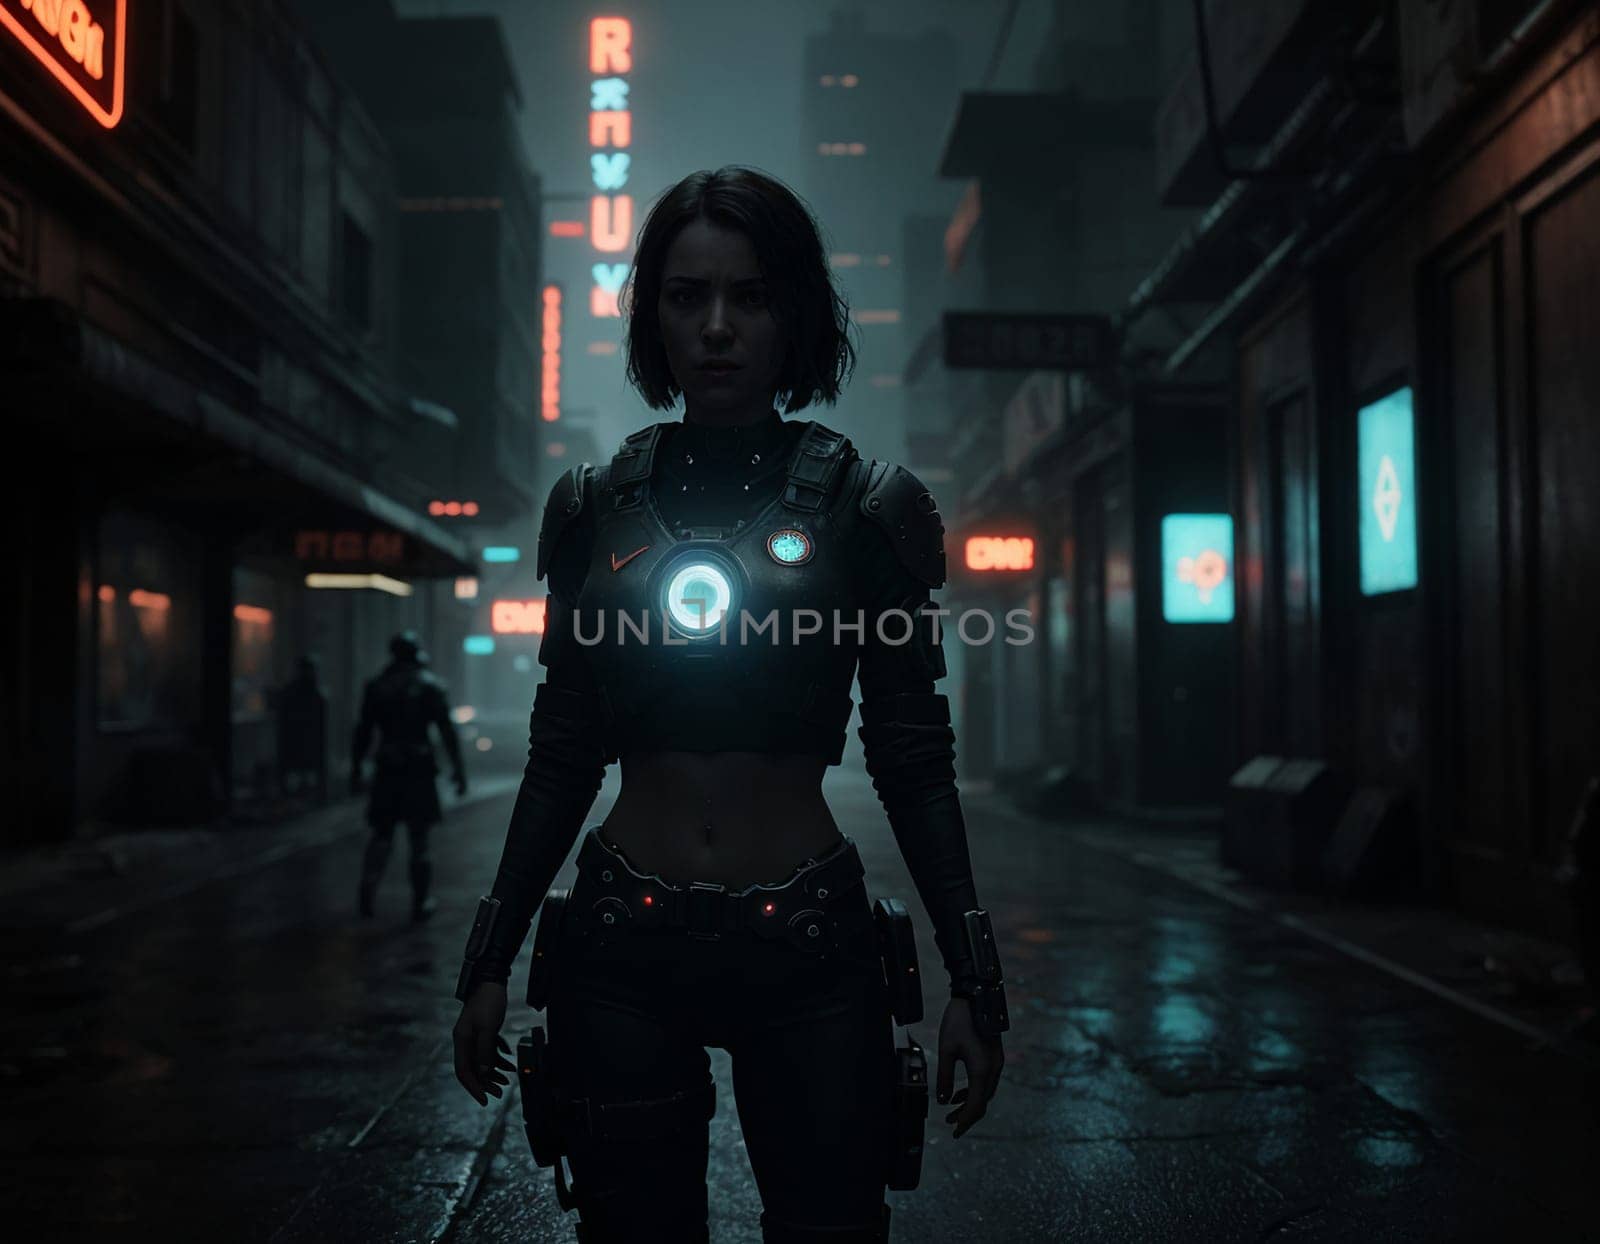 A beautiful girl in the style of Sky fi and cyberpunk. High quality illustration